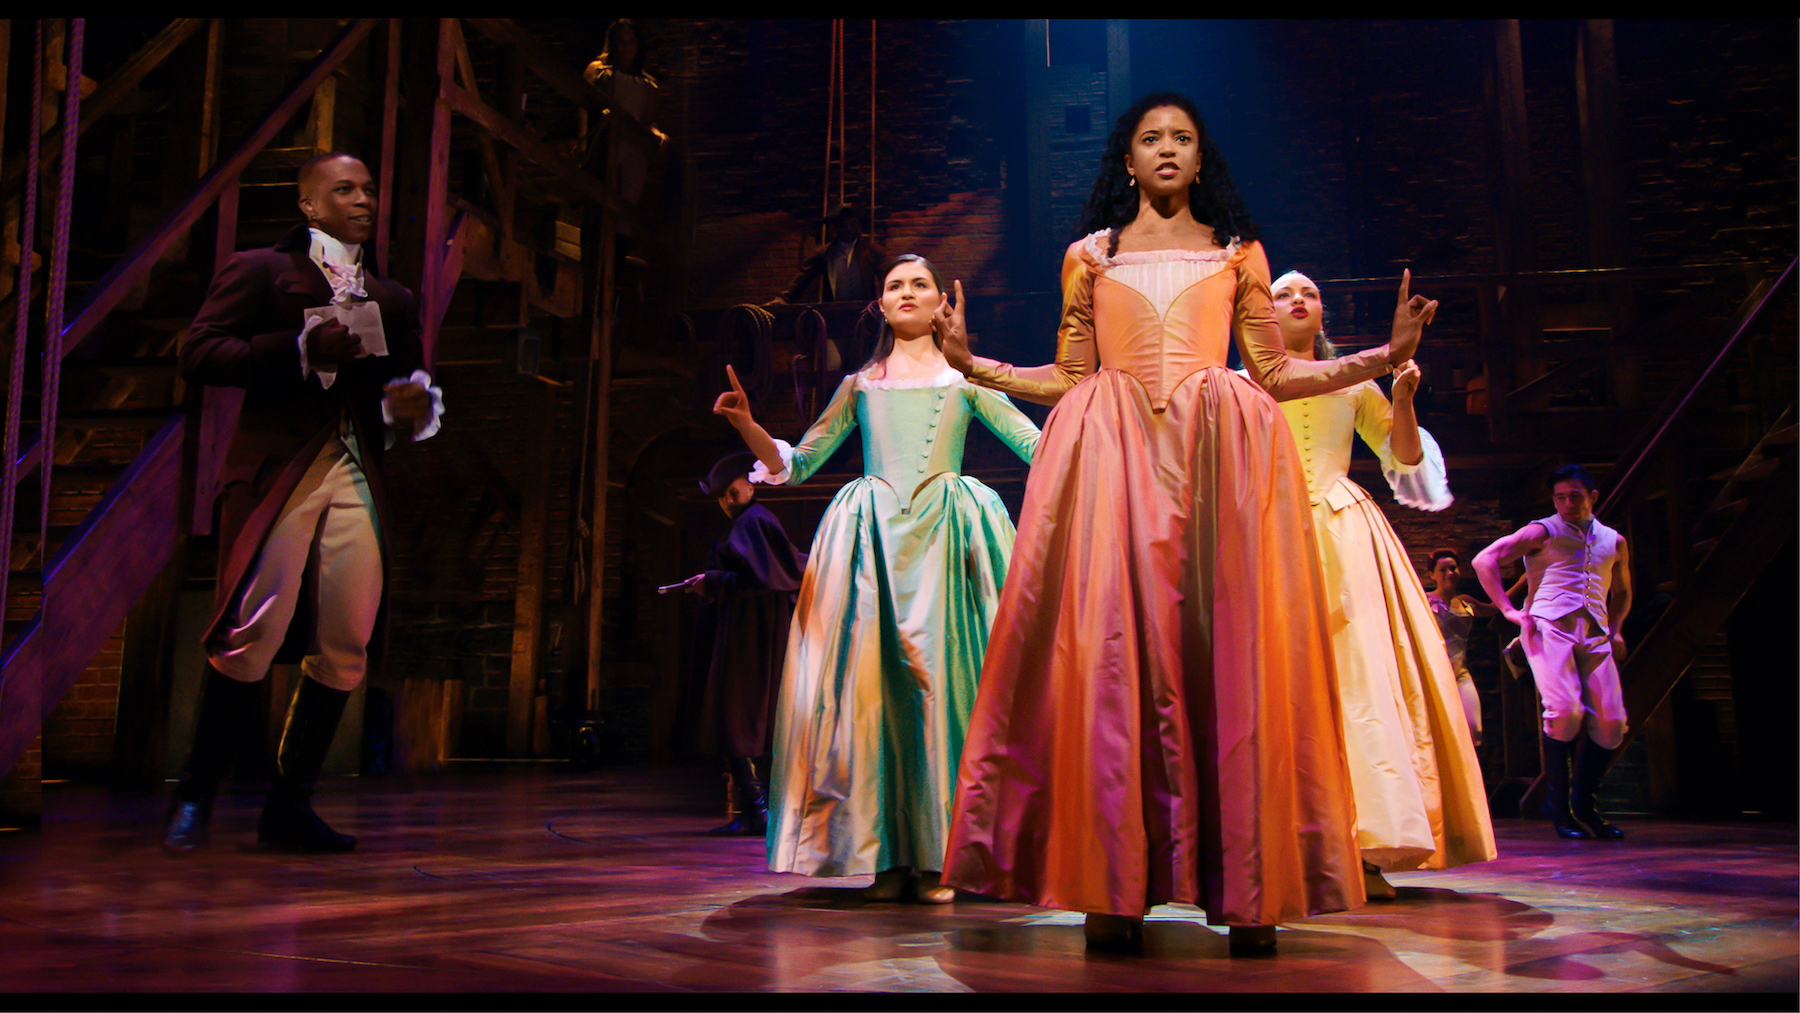 The Schuyler Sisters in Hamilton: An American Musical. Image: Disney+